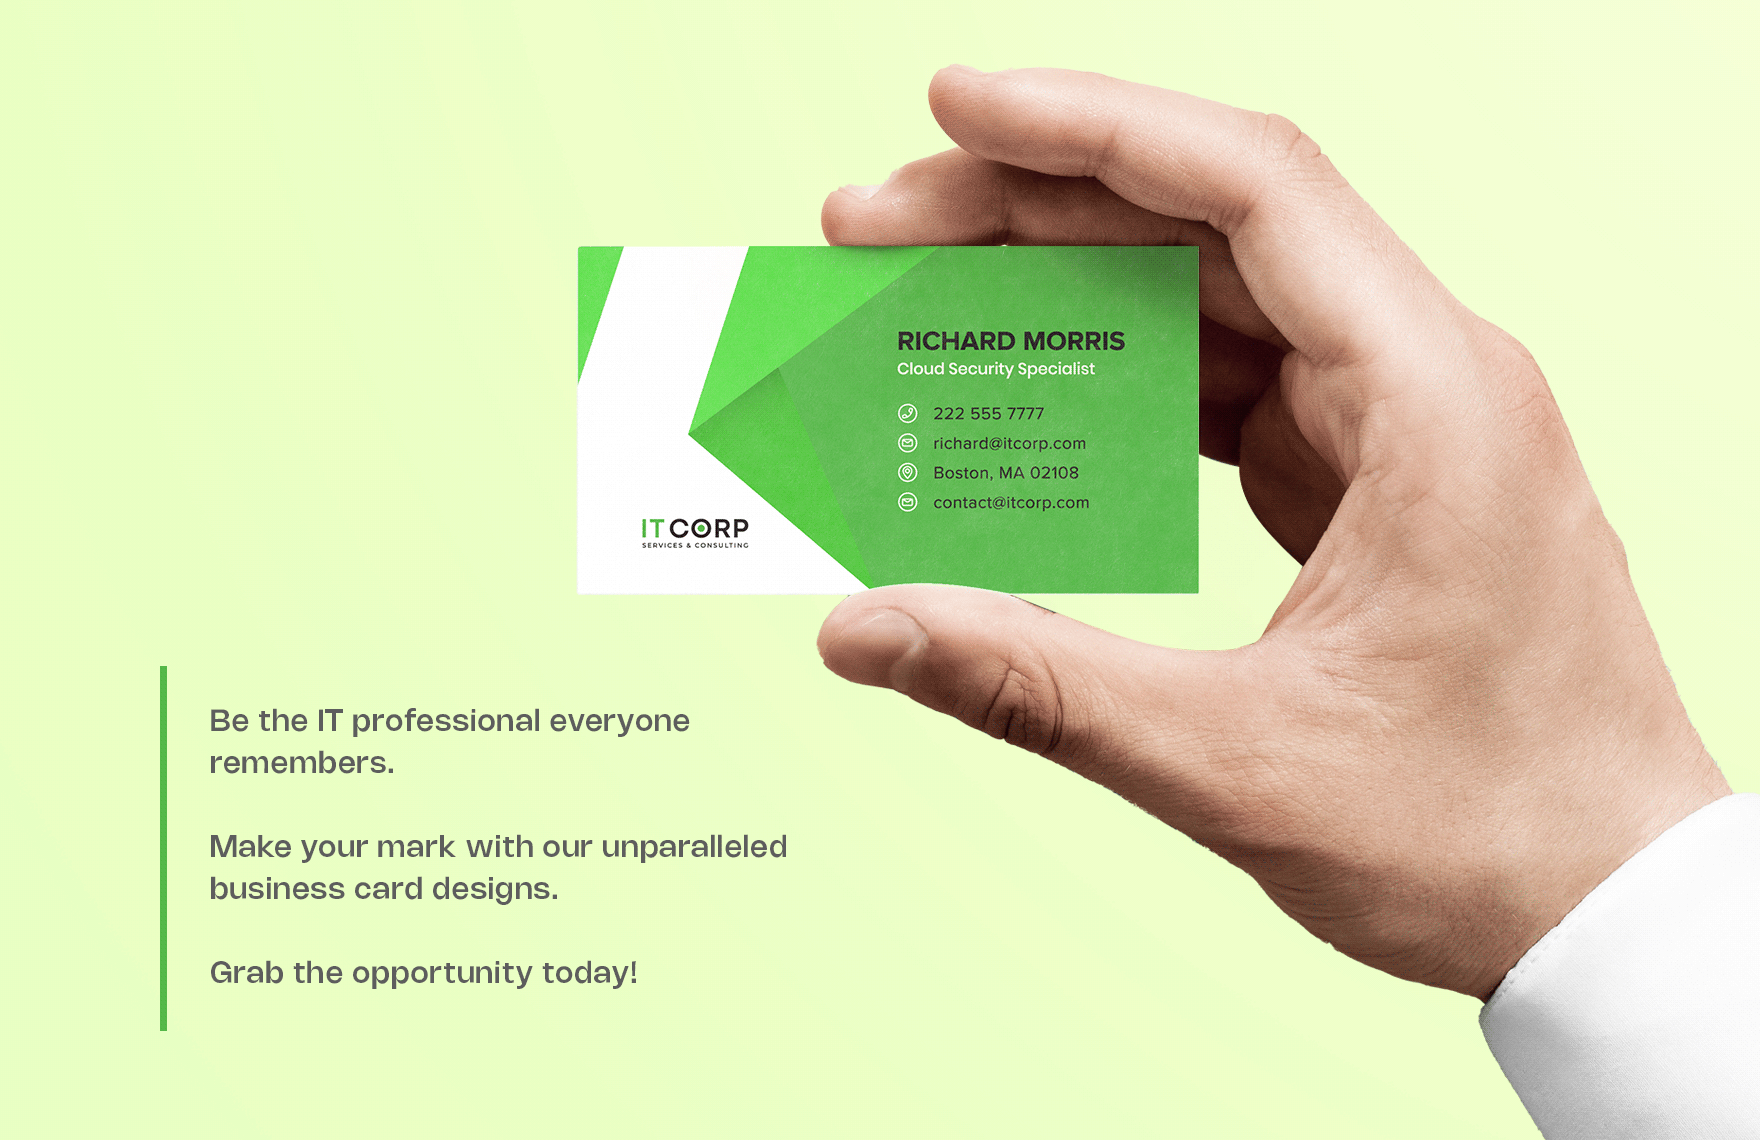 IT Cloud Consulting & Implementation Business Card Template